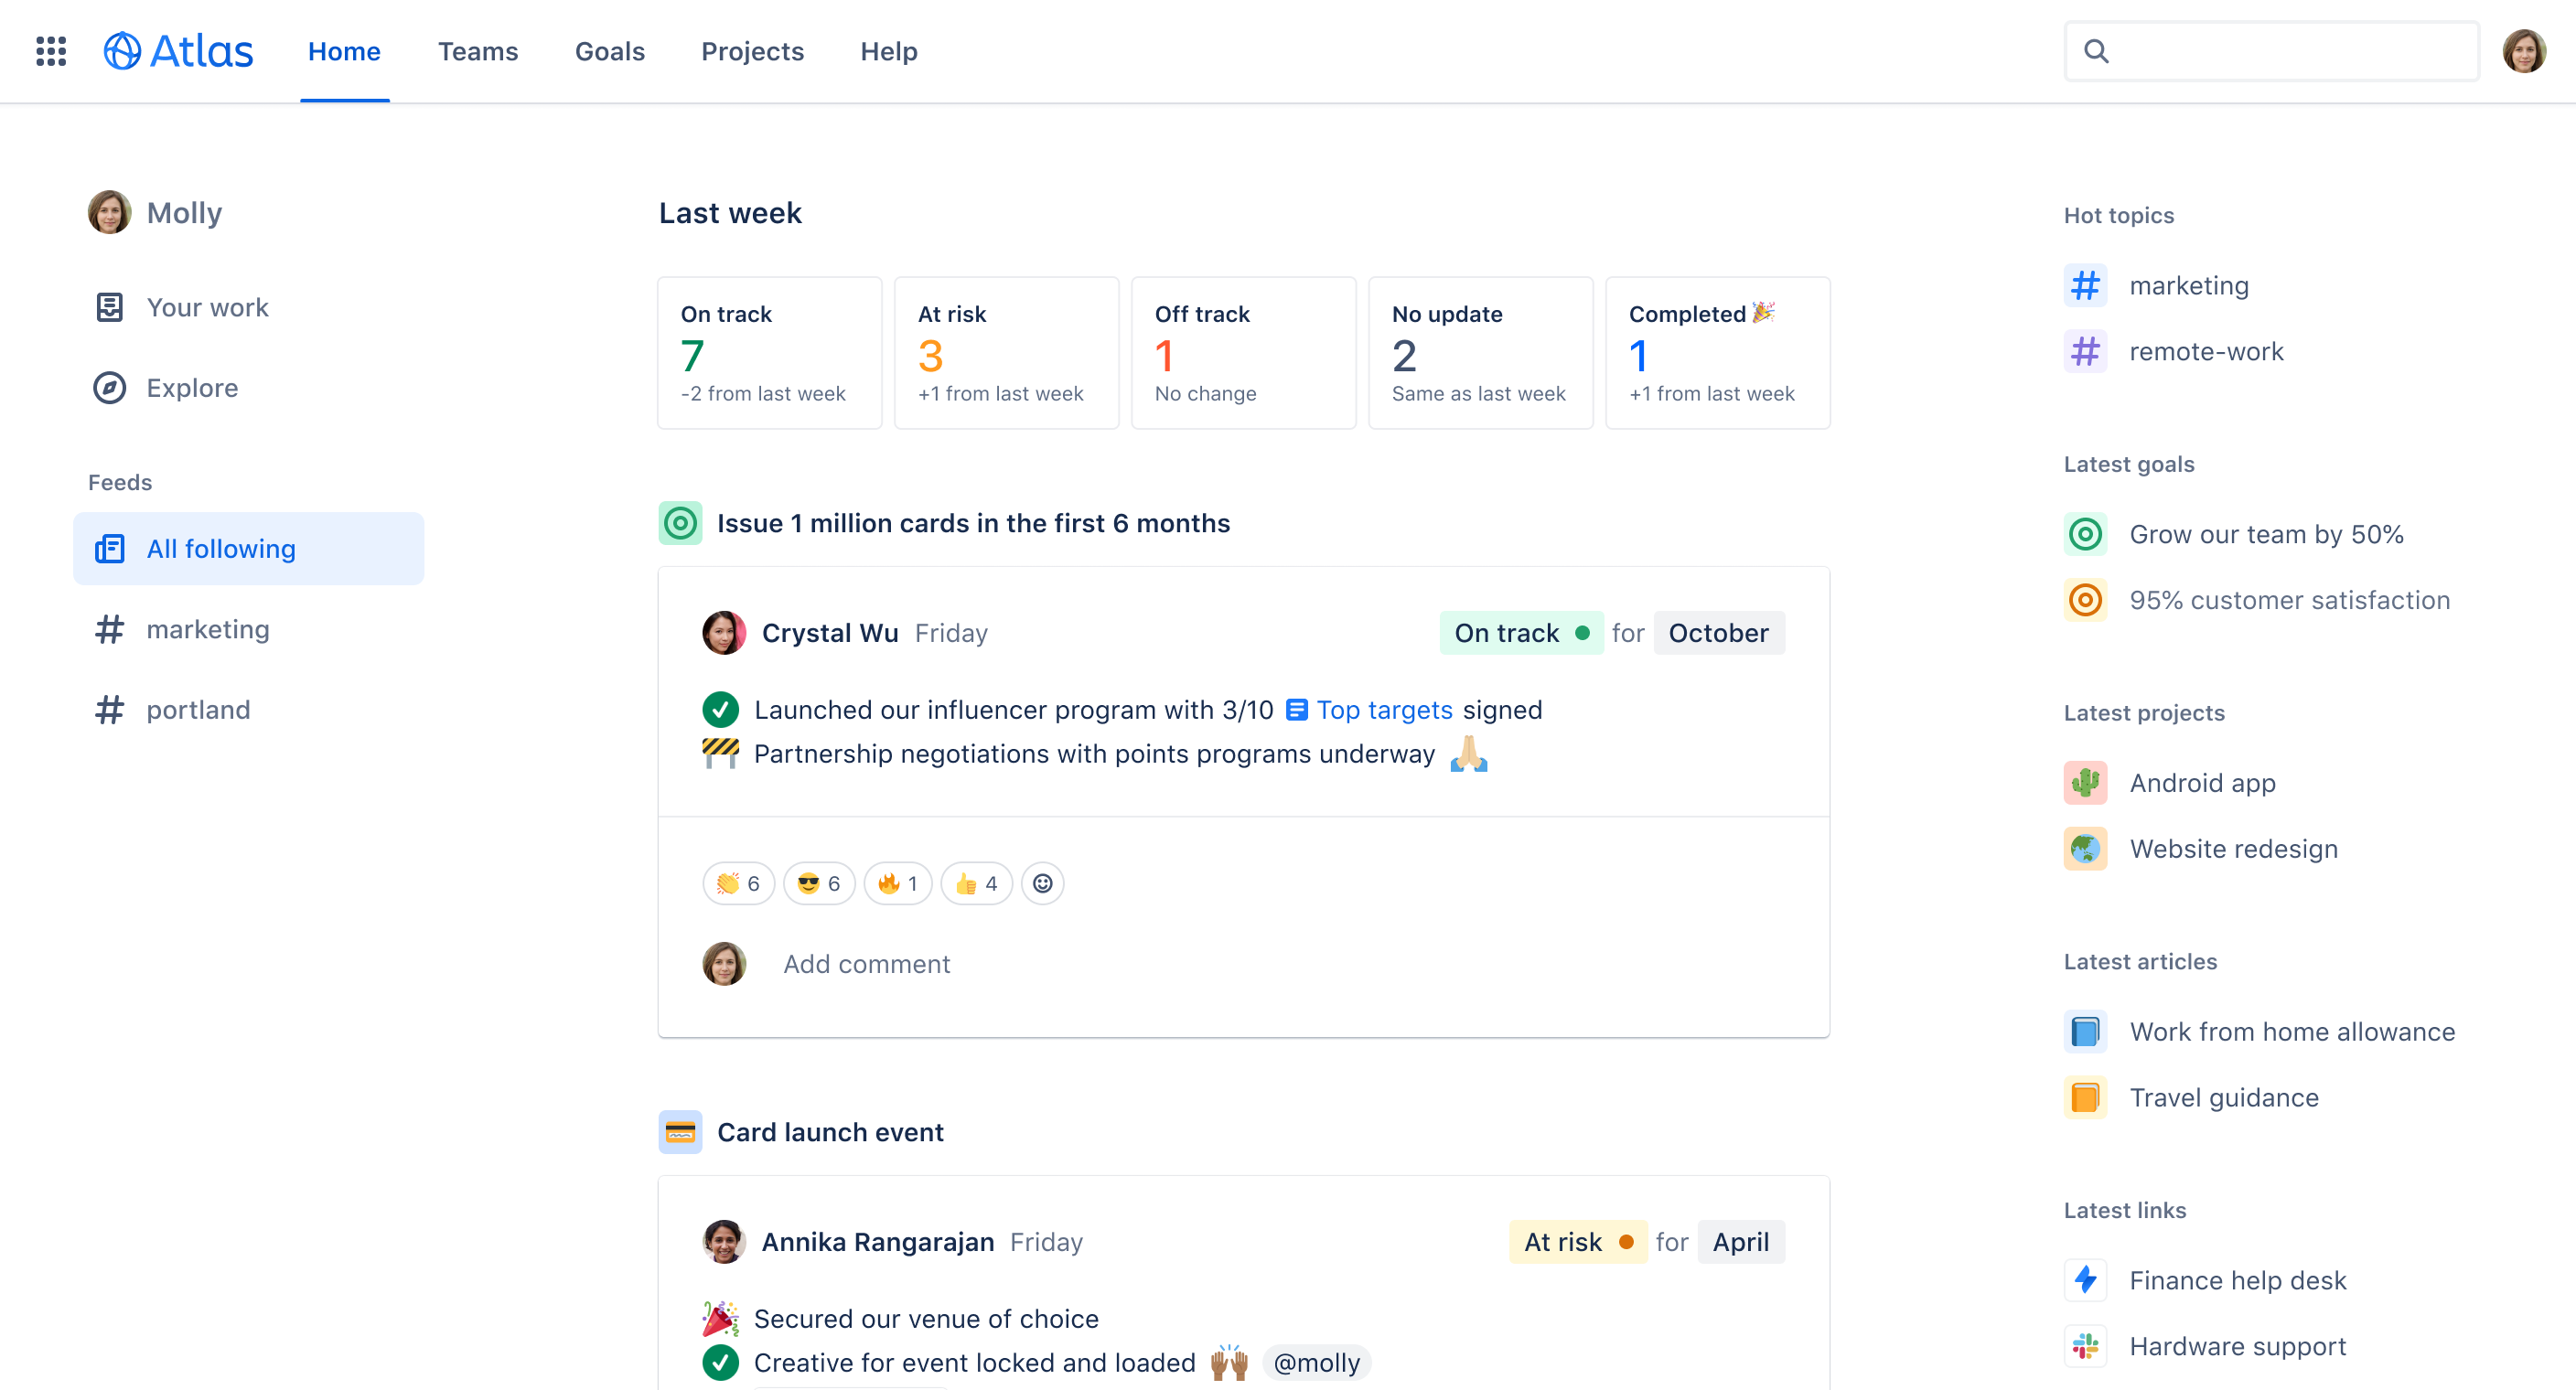 Atlas dashboard view featuring project updates, team goals, and outcome tracking